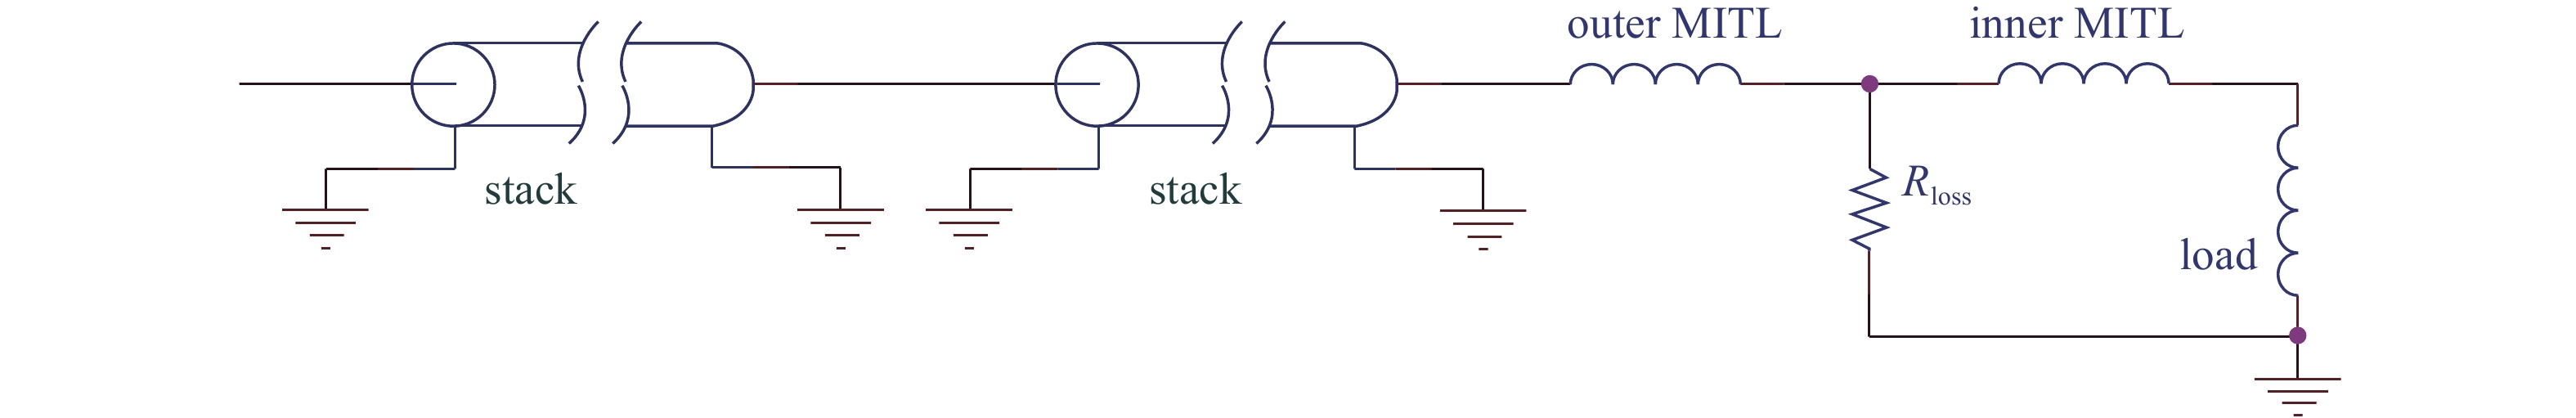 Single-level circuit model for the stack and vacuum section of Julong-I